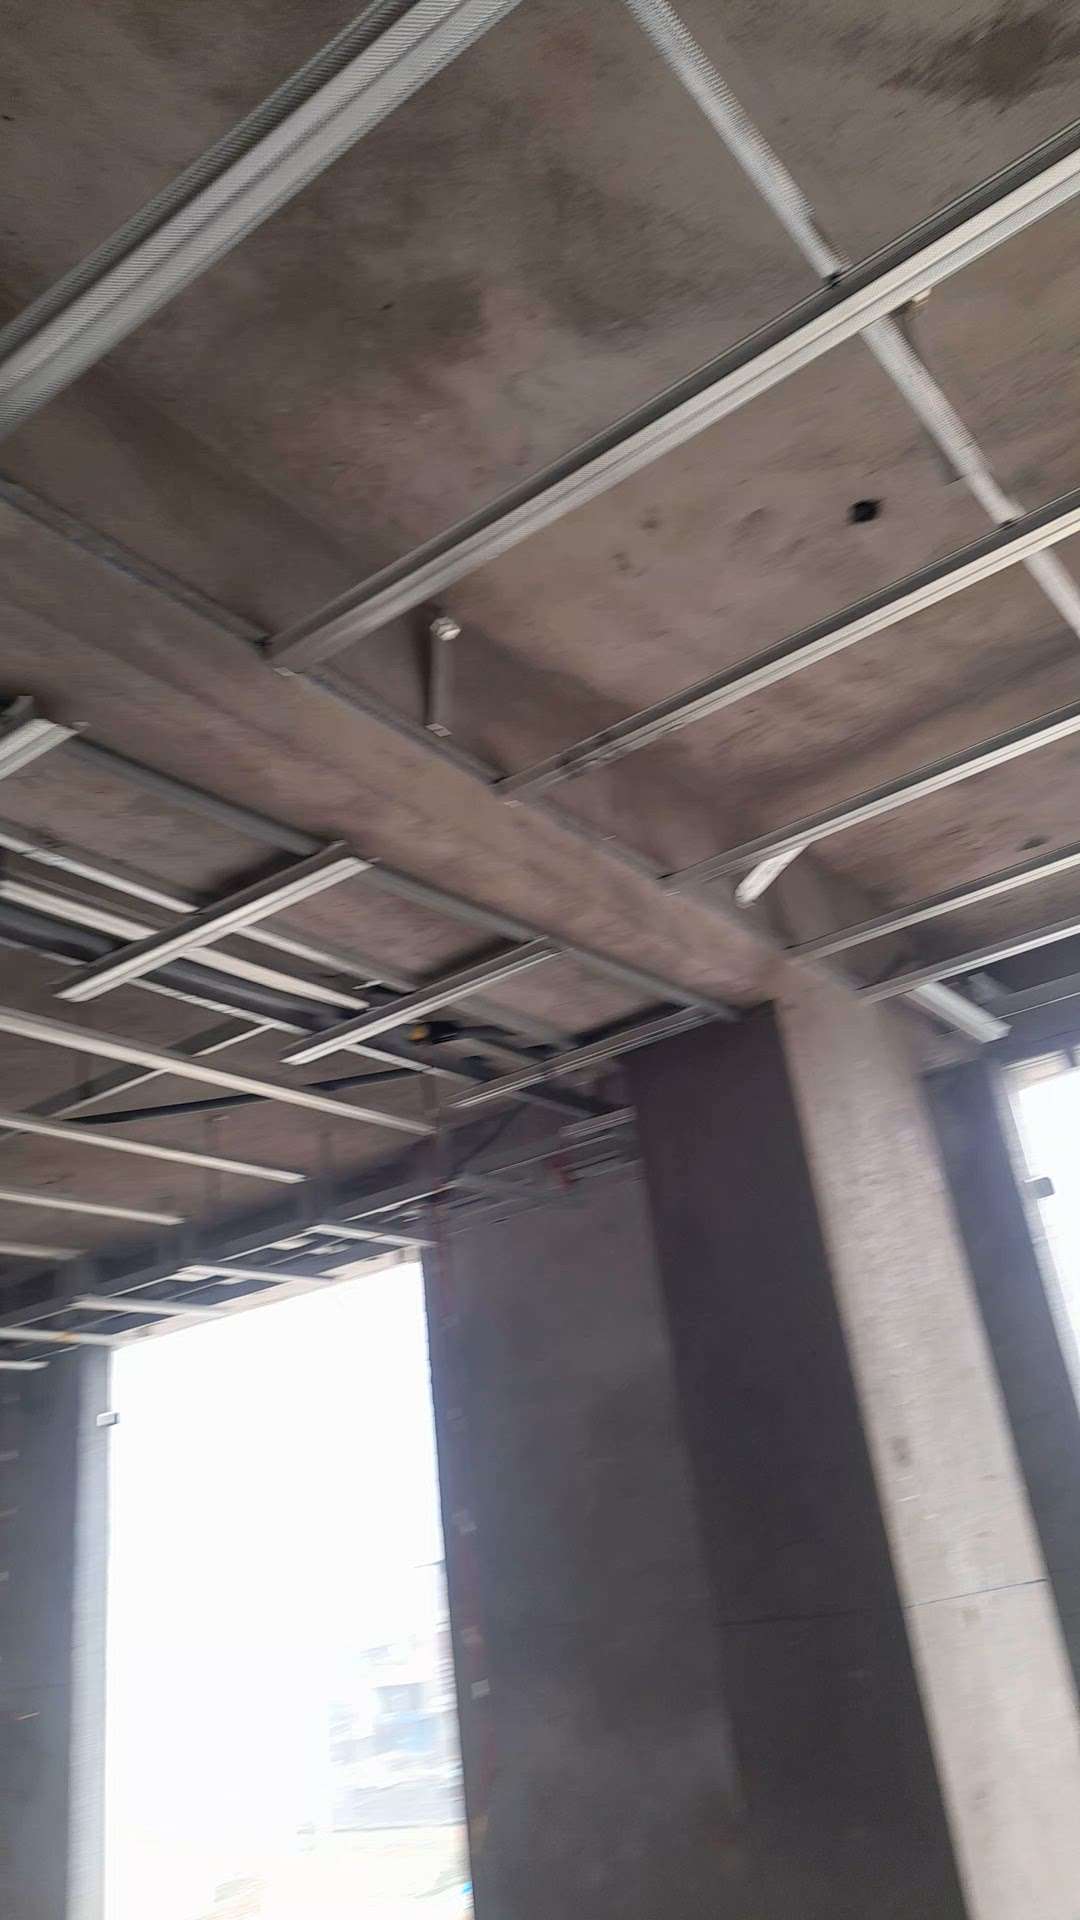 fall ceiling 65 rupaye square feet mobile number 887 106 4597 MP Bhopal